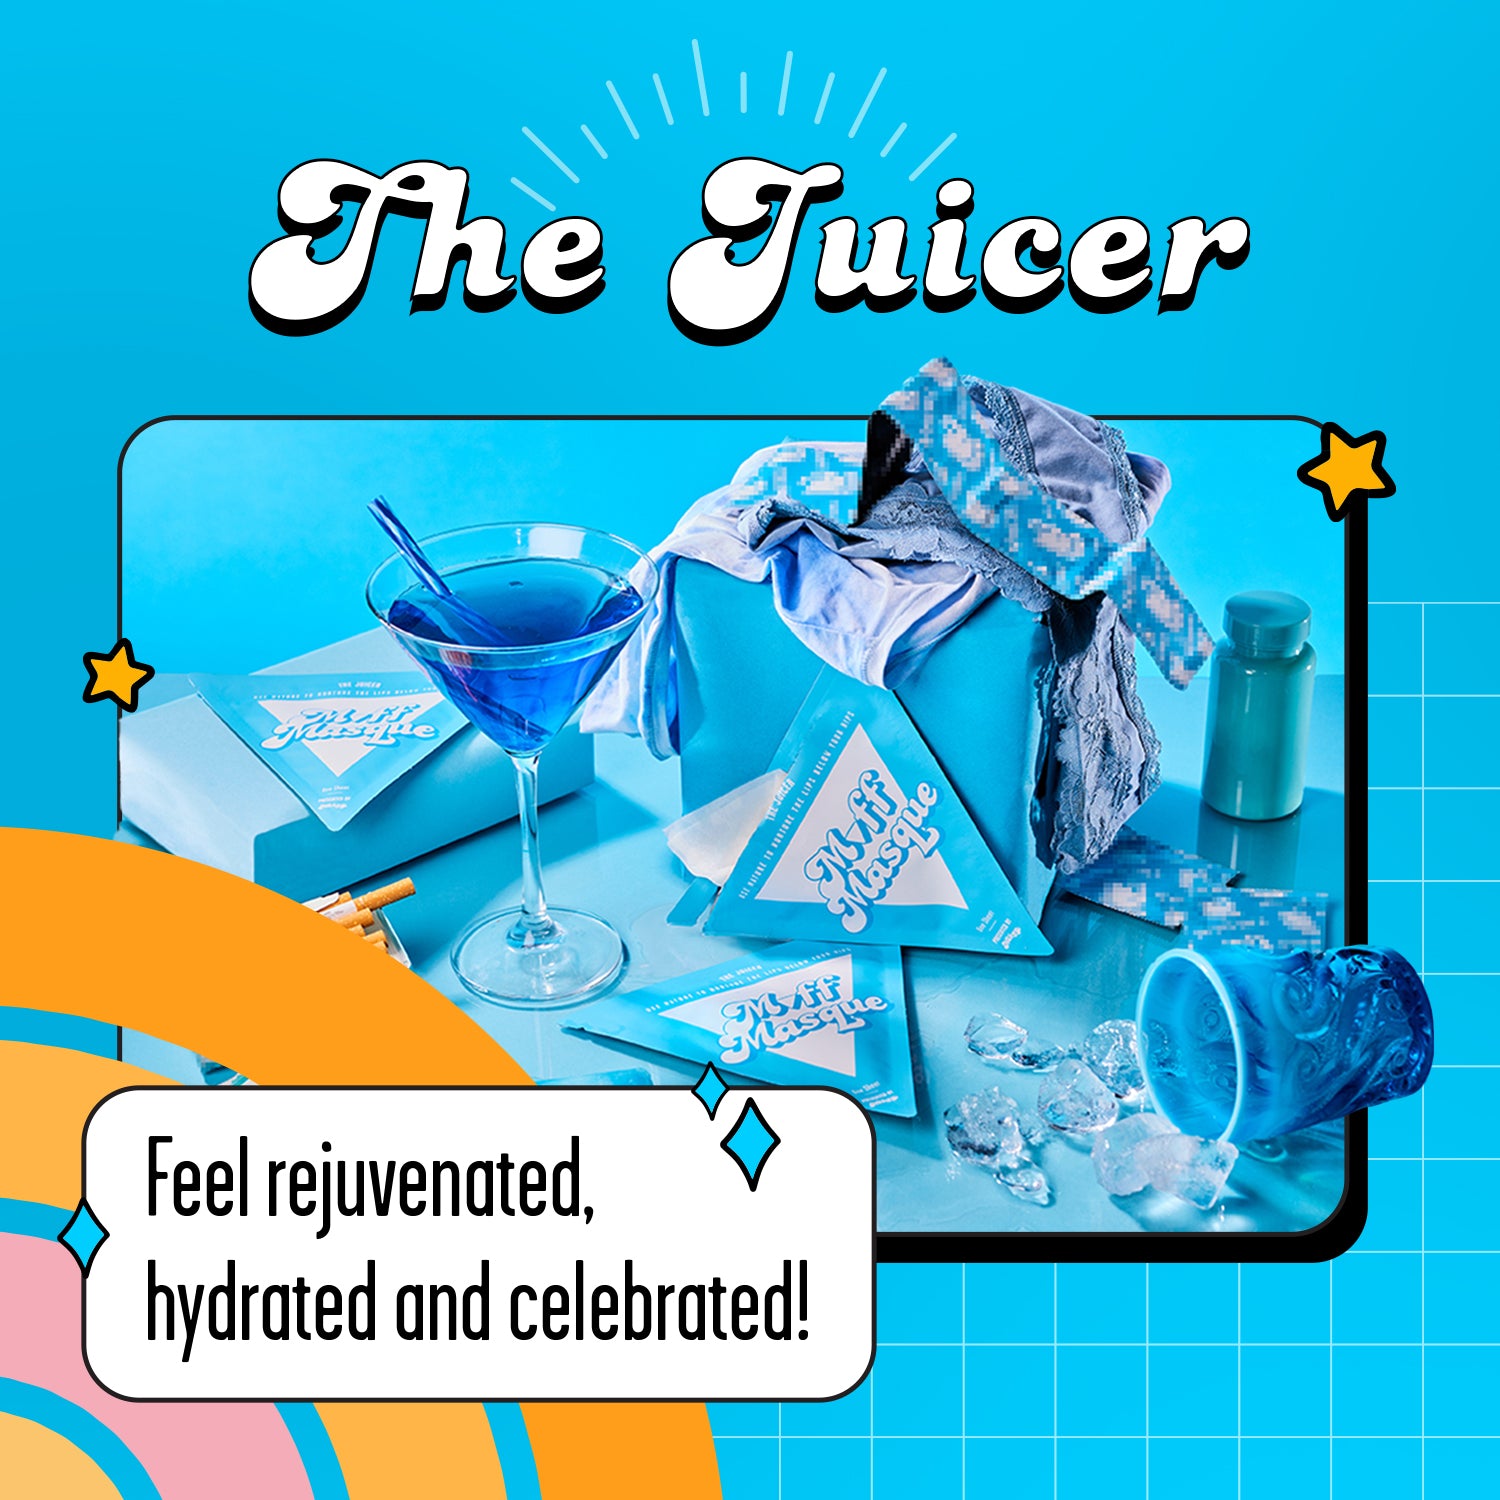 The Juicer - Hydrating. Perfect for pre-play or post-shower